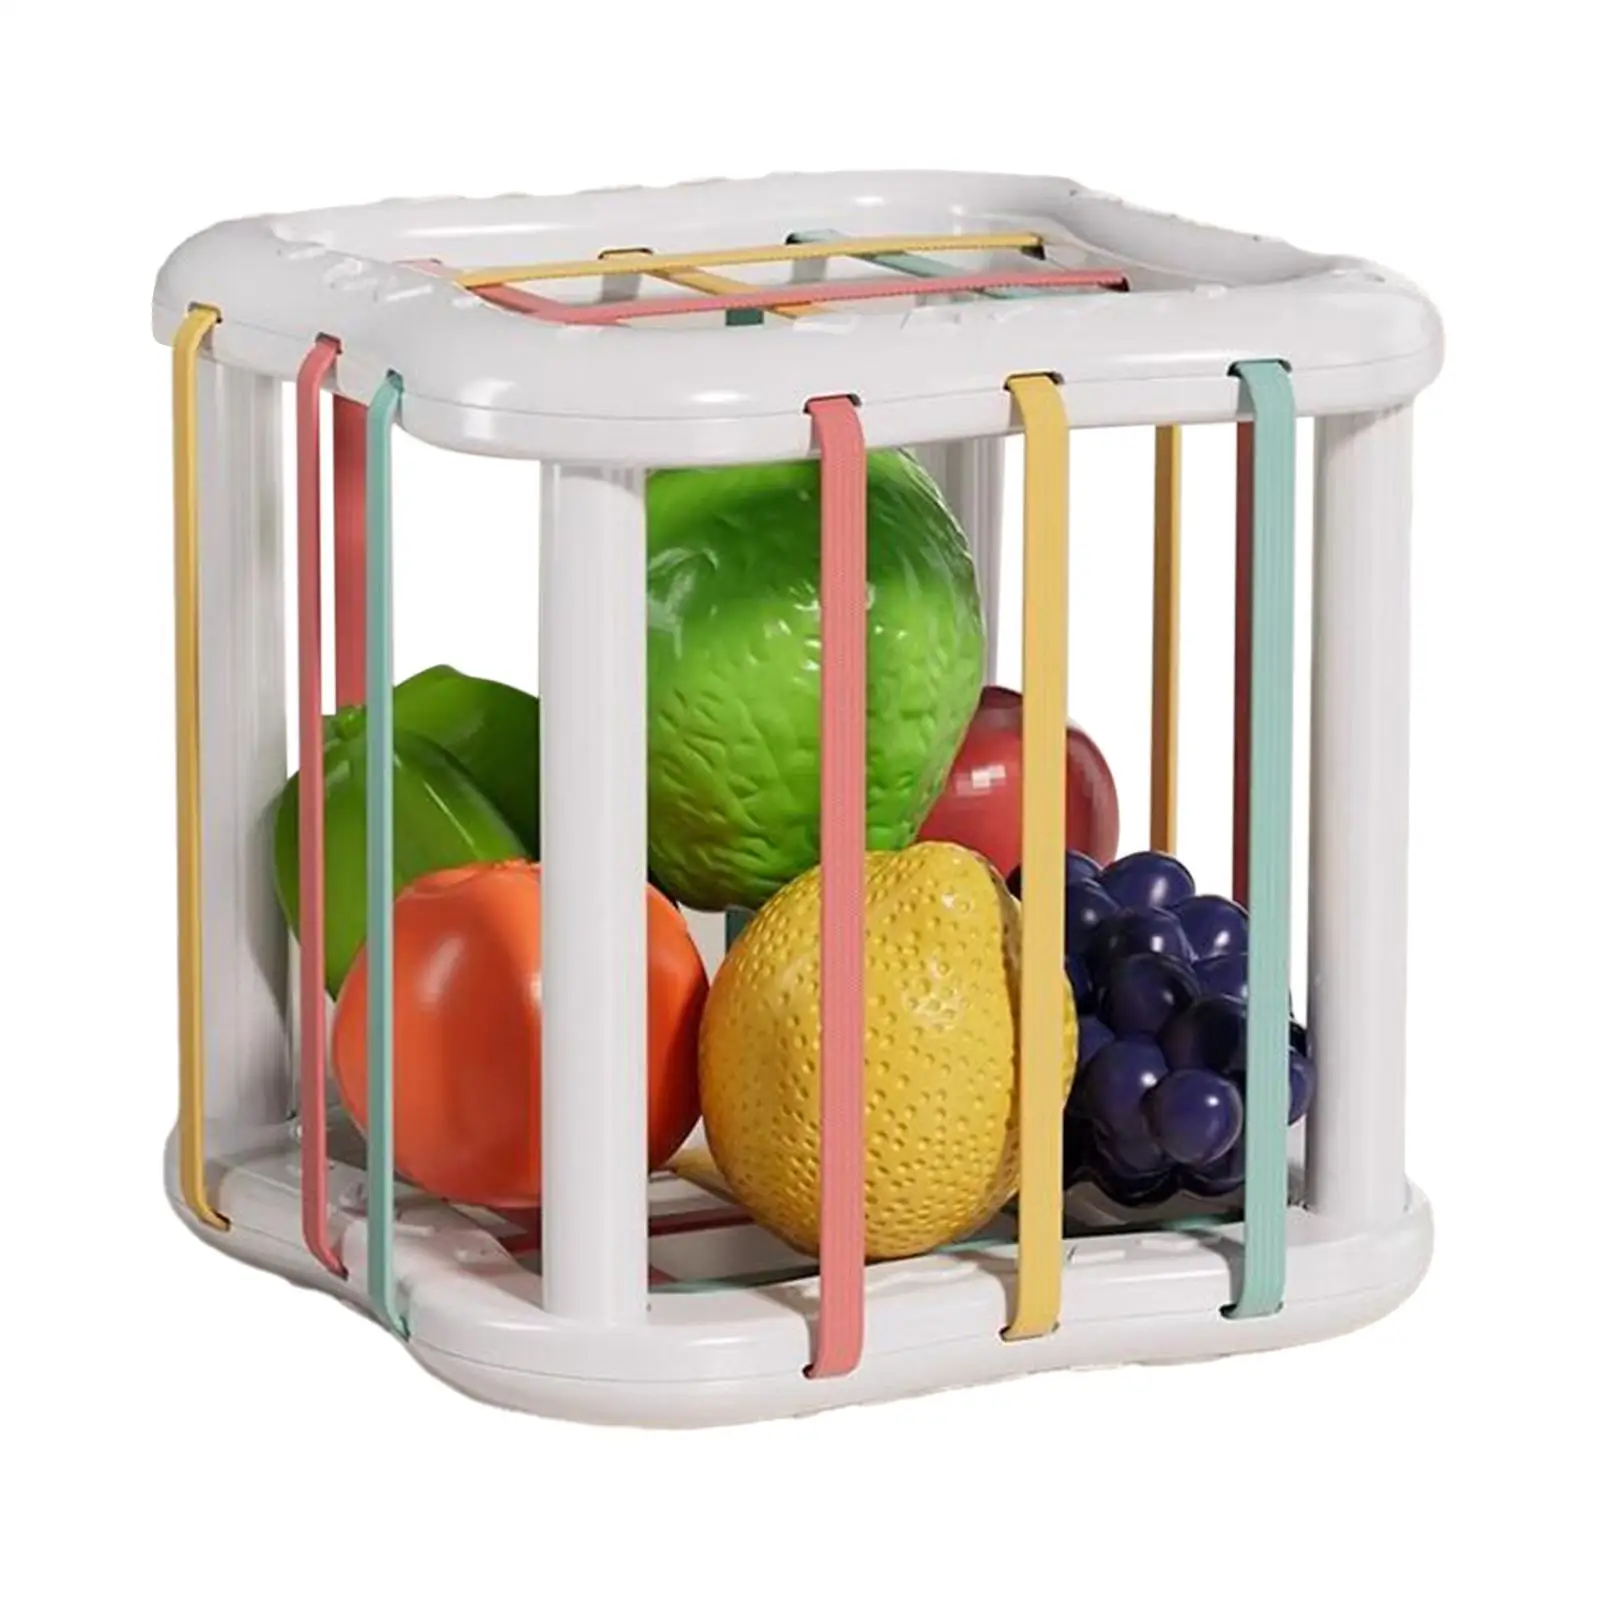 Storage Cube Bins and 6 Fruits Balls Montessori Baby Shape Sorter Toy for Girls Boys Toddlers Age 1 2 3 Children Birthday Gifts